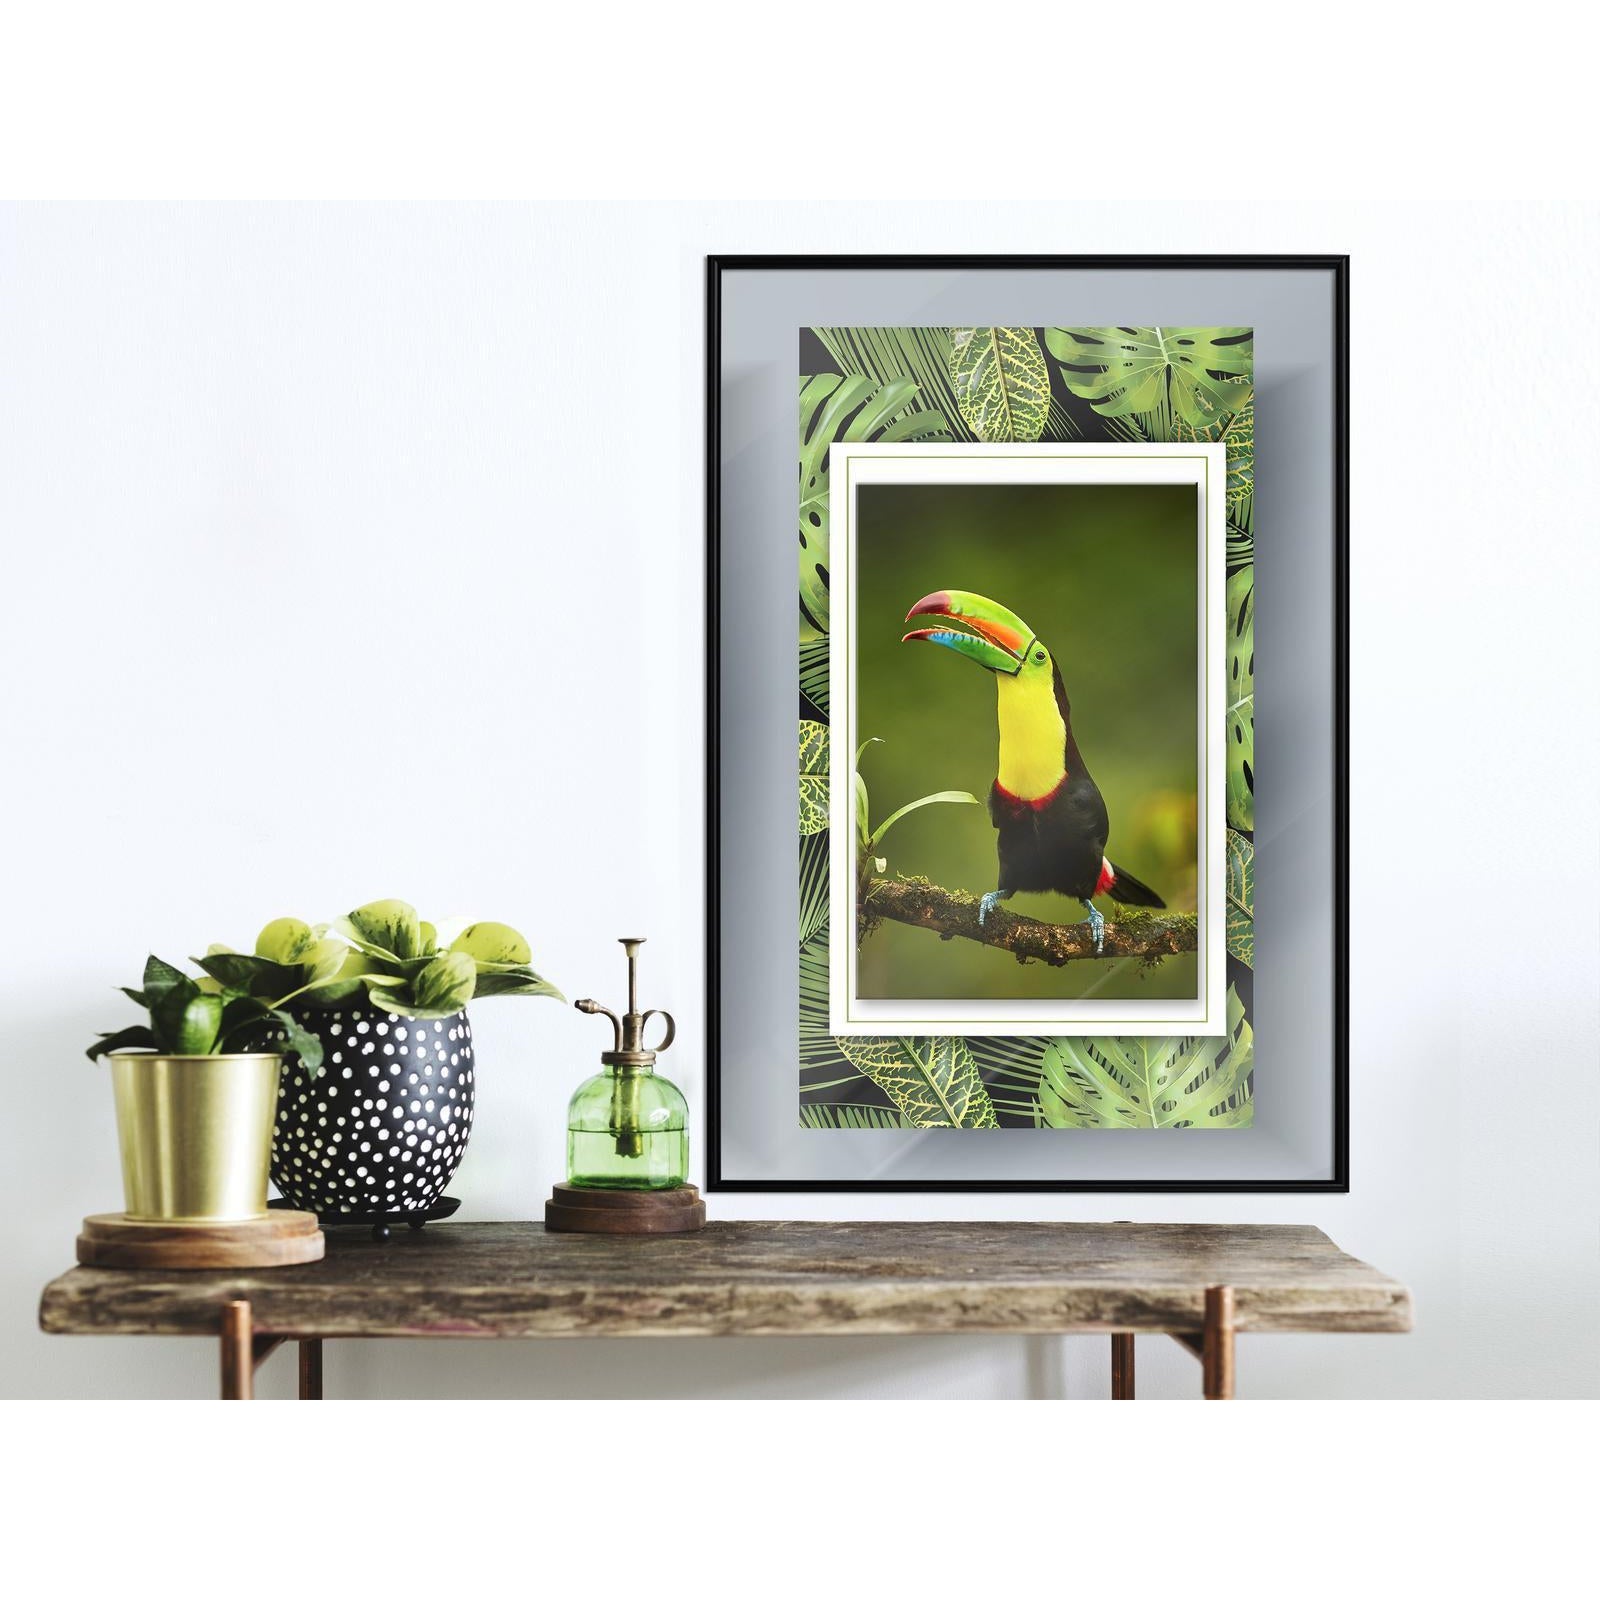 Inramad Poster / Tavla - Toucan in the Frame-Poster Inramad-Artgeist-peaceofhome.se